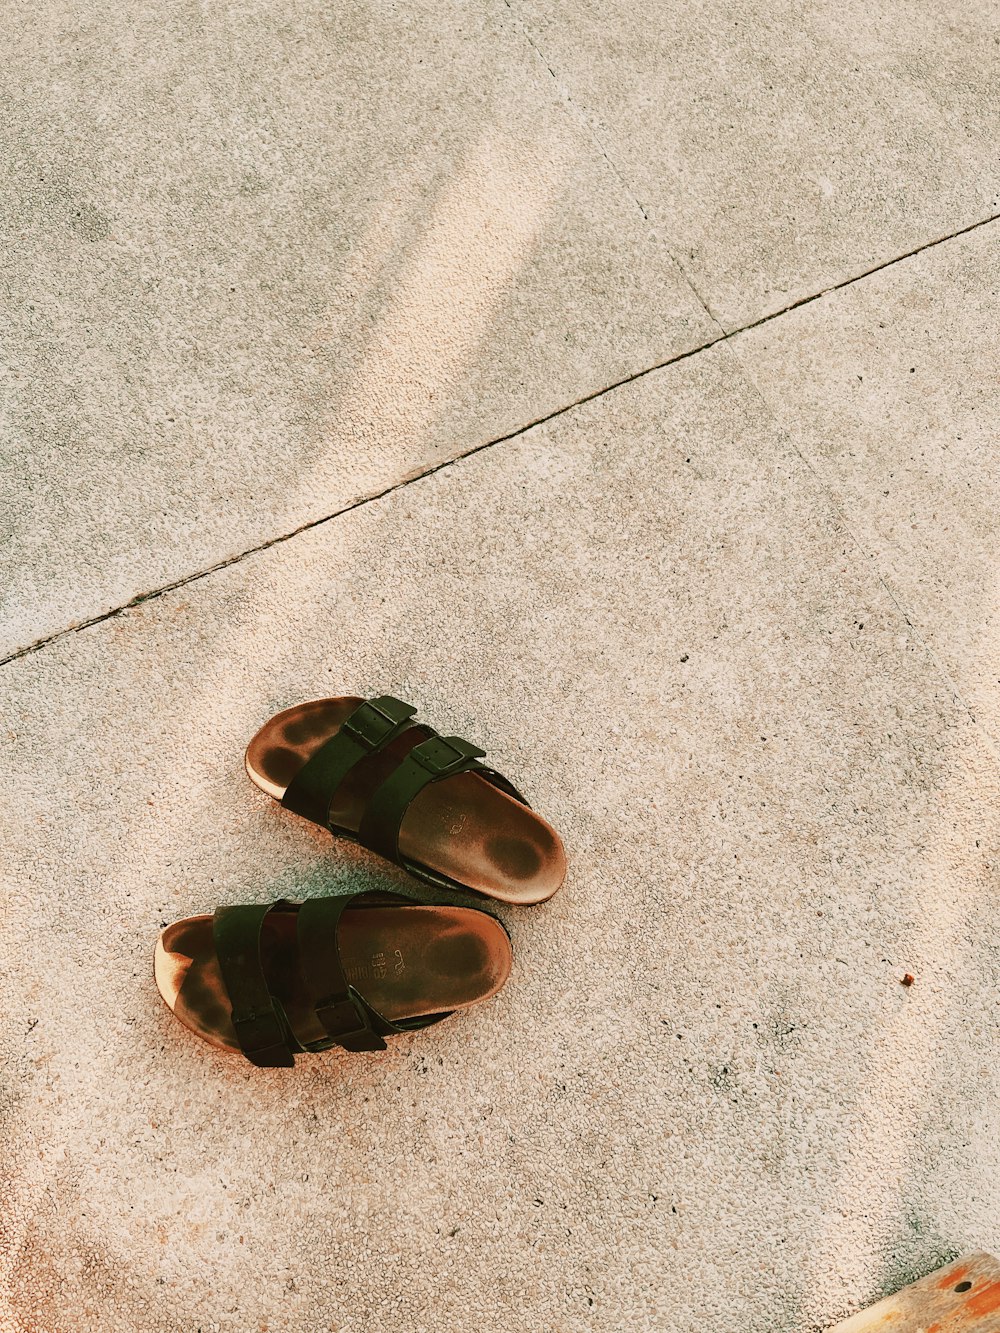 a pair of shoes on a concrete surface